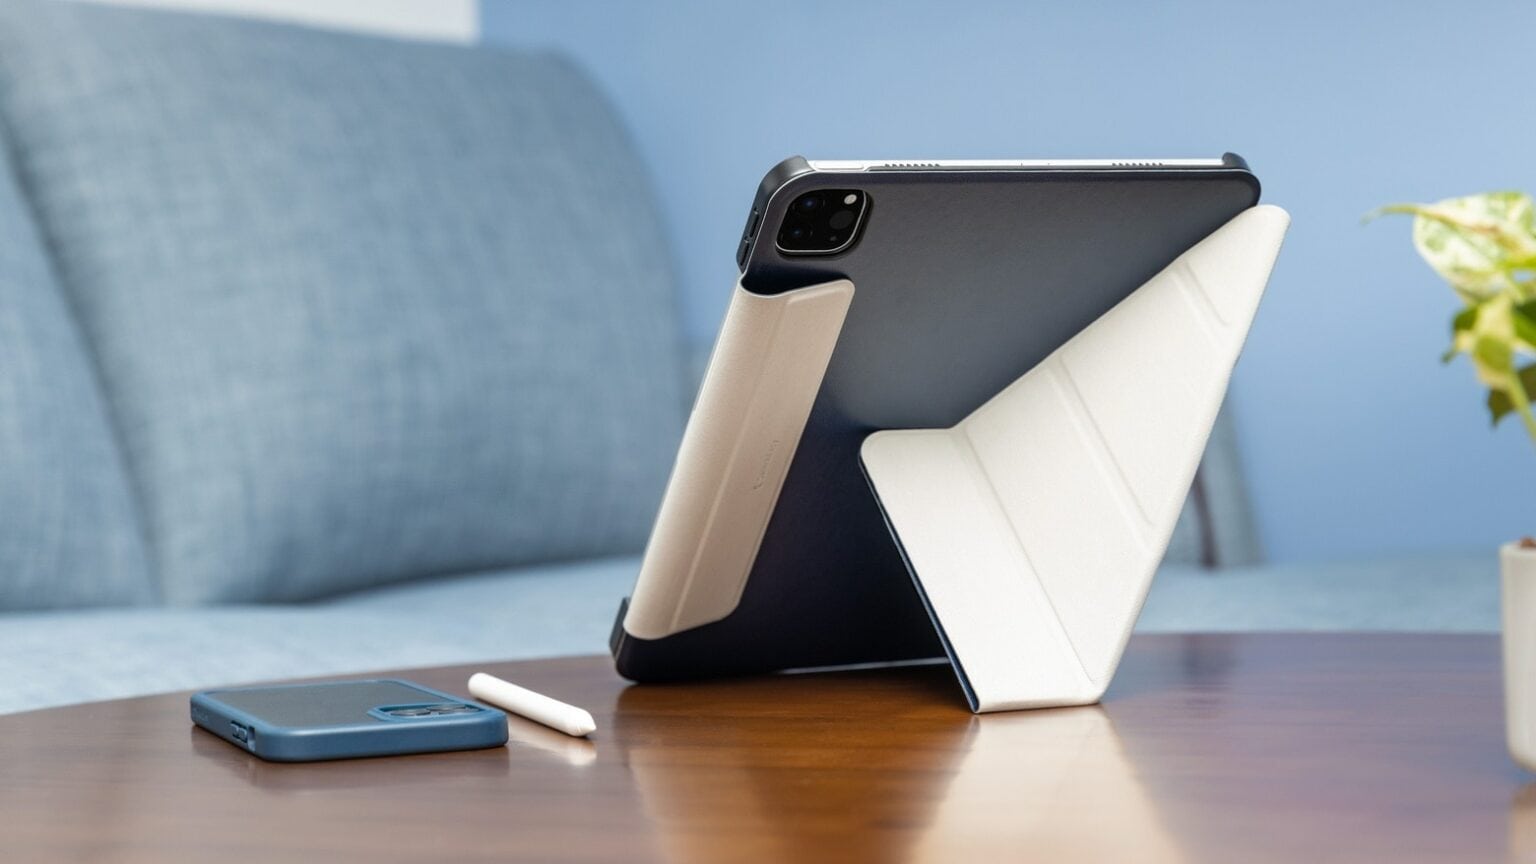 SwitchEasy's origami case for iPad provides multiple positions.